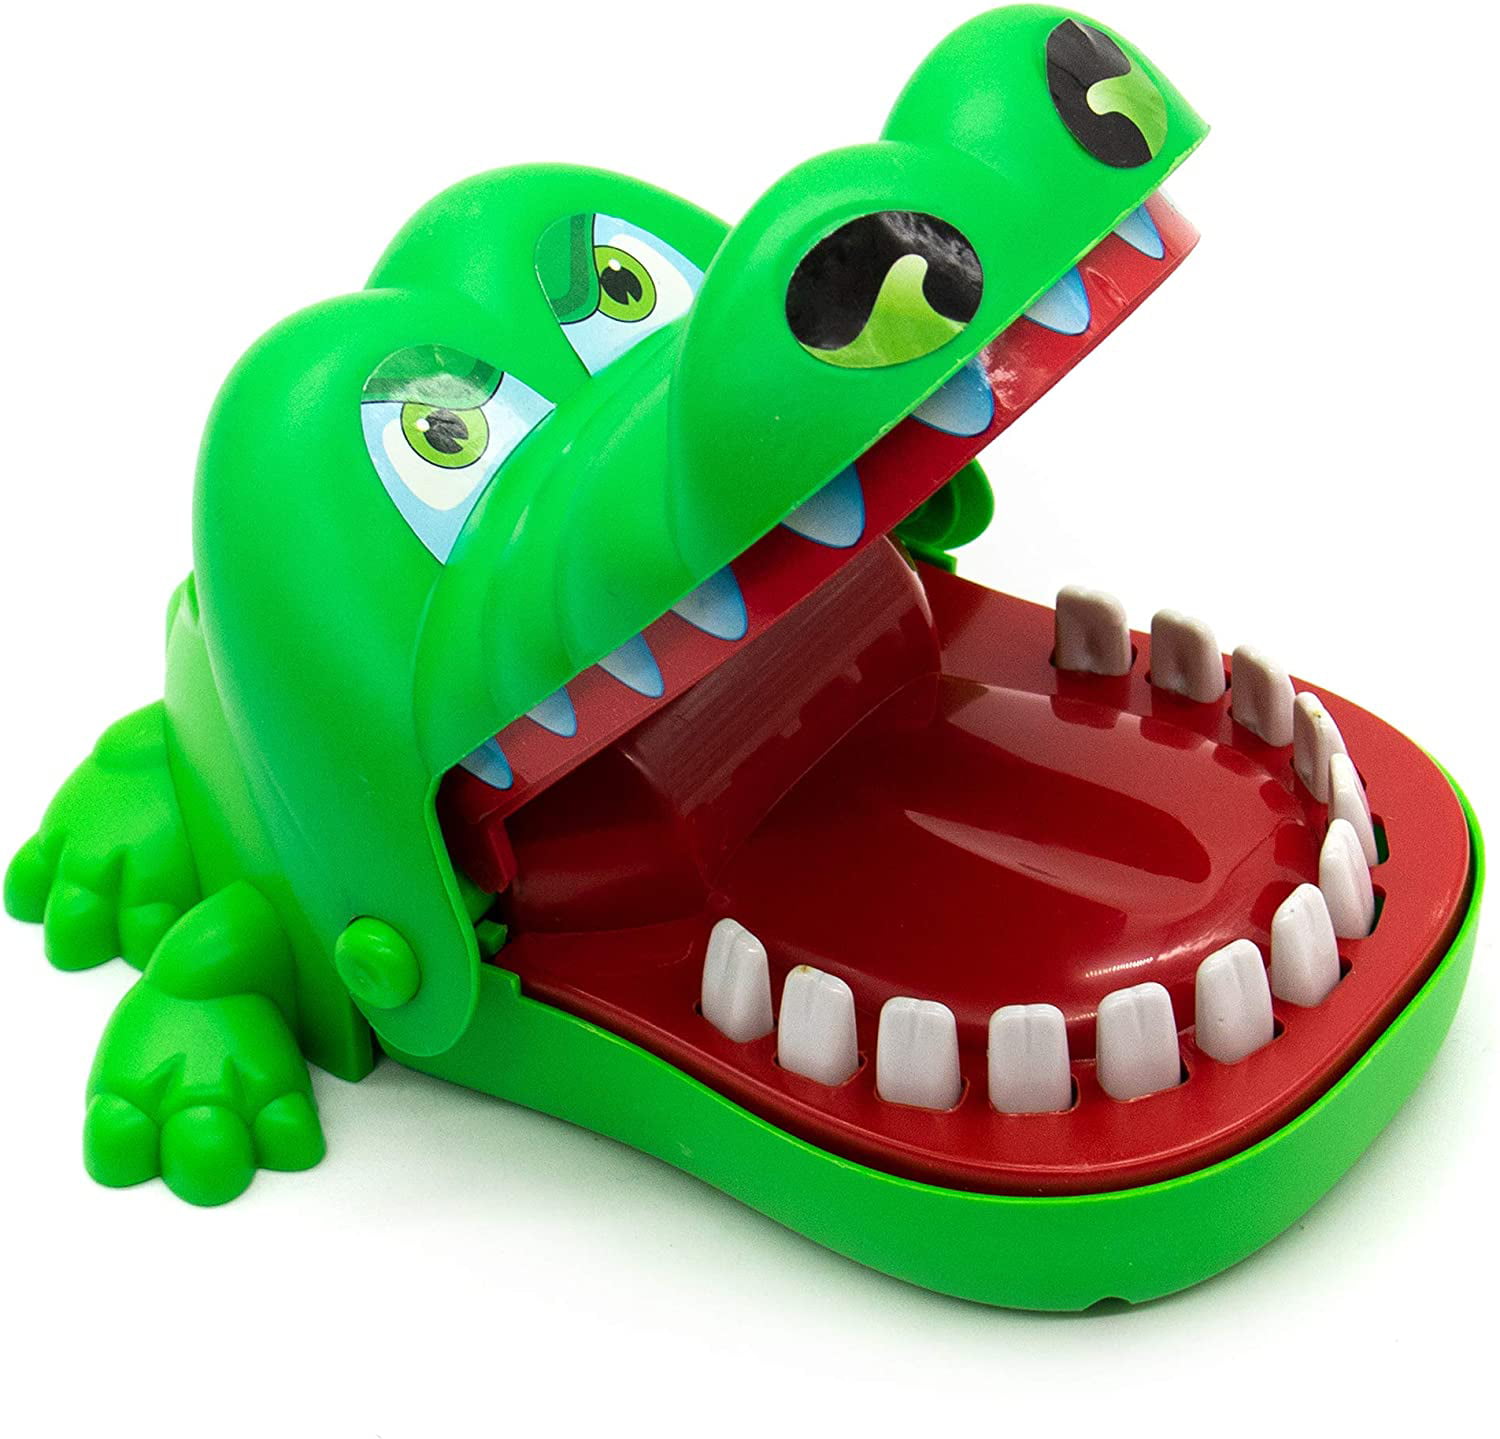 Crocodile Toy Dentist Crocodile Biting Finger Game Funny Toys for Kids 1 to 4 Players Ages 4 and Up 